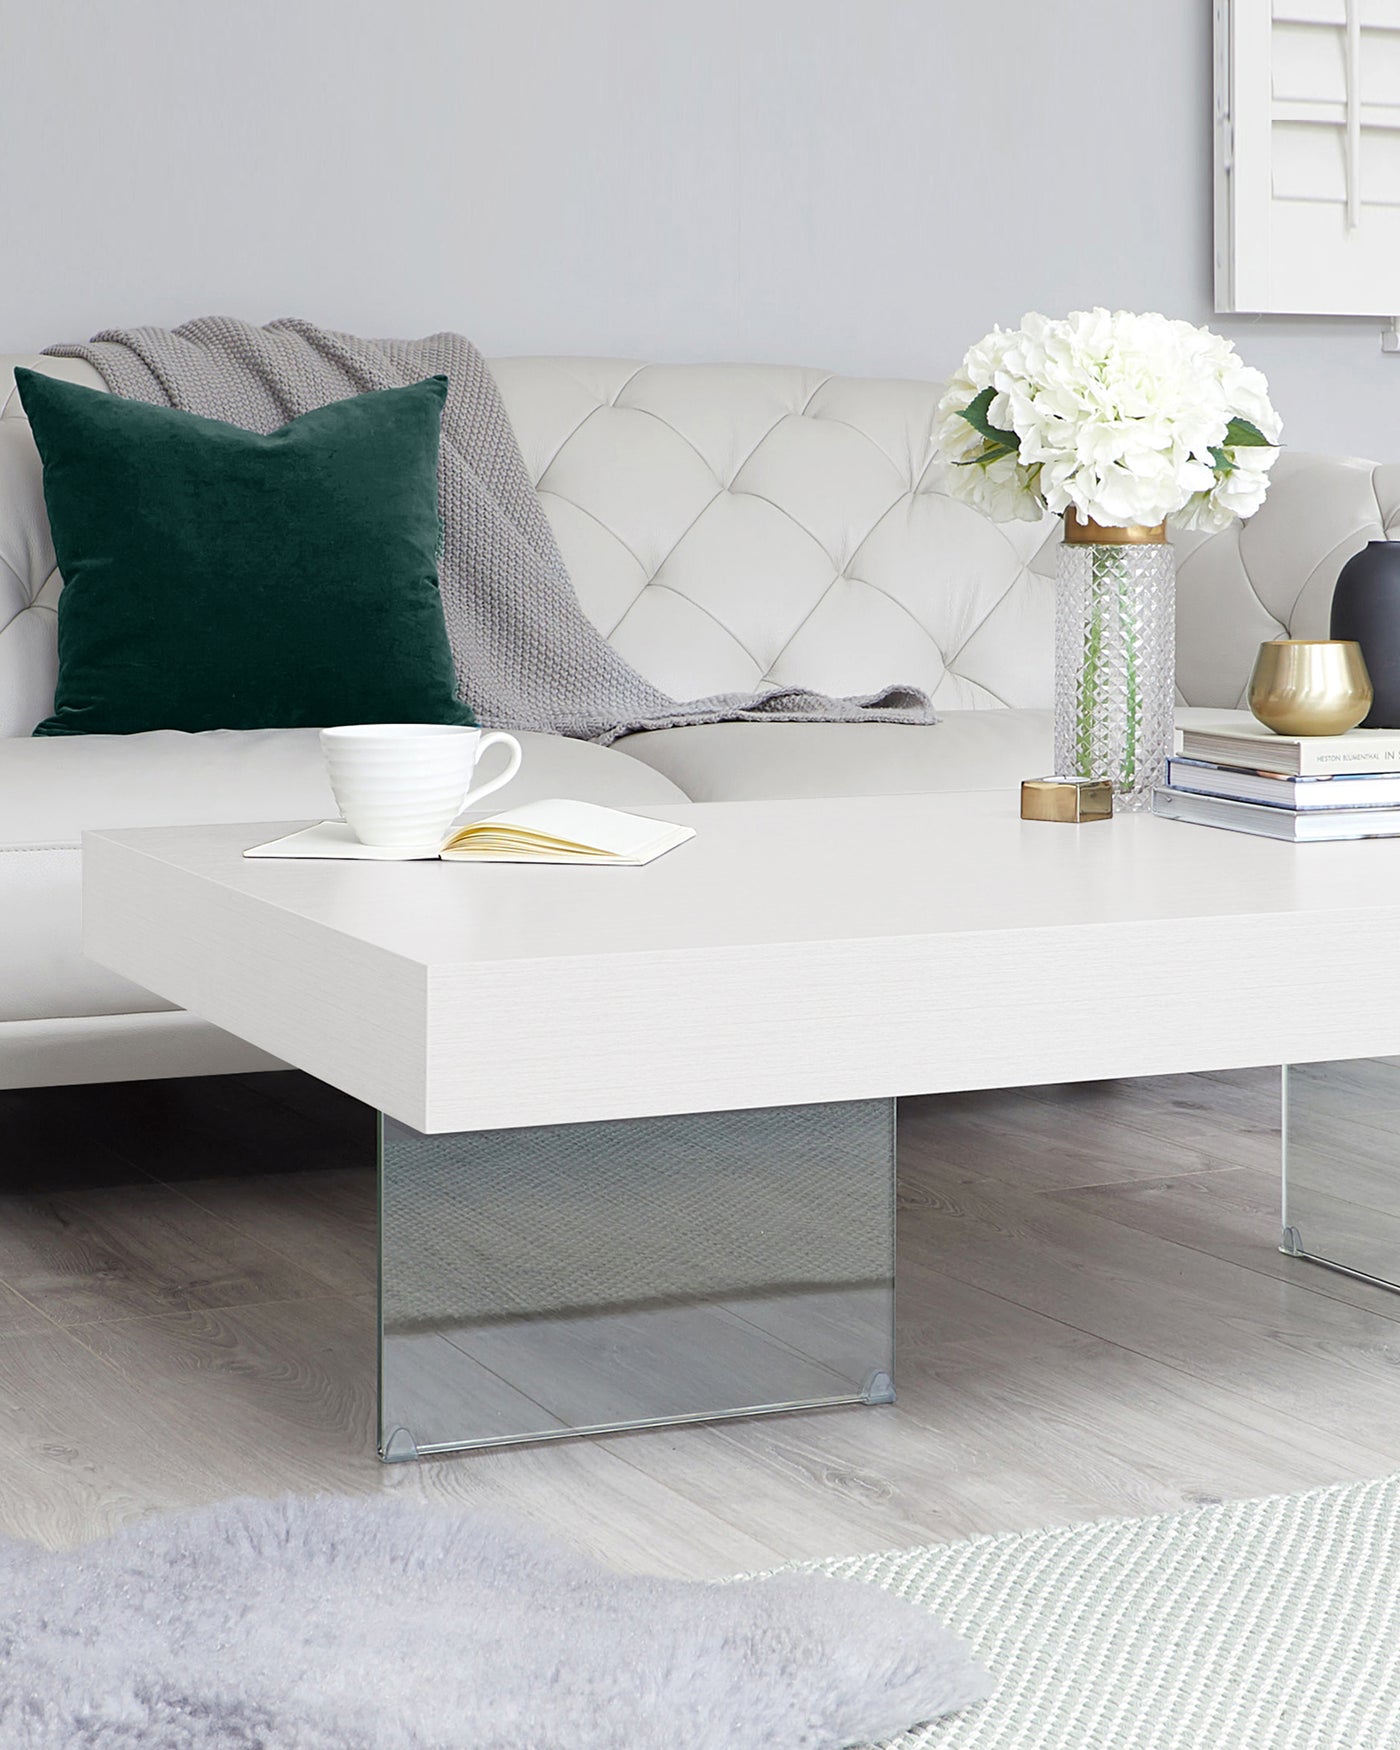 Modern living room featuring a white tufted sofa with dark green and grey throw pillows, and a low-profile white coffee table with a sleek design and glass base. A decorative vase with white flowers, cup and saucer, and stack of books adorn the tabletop.